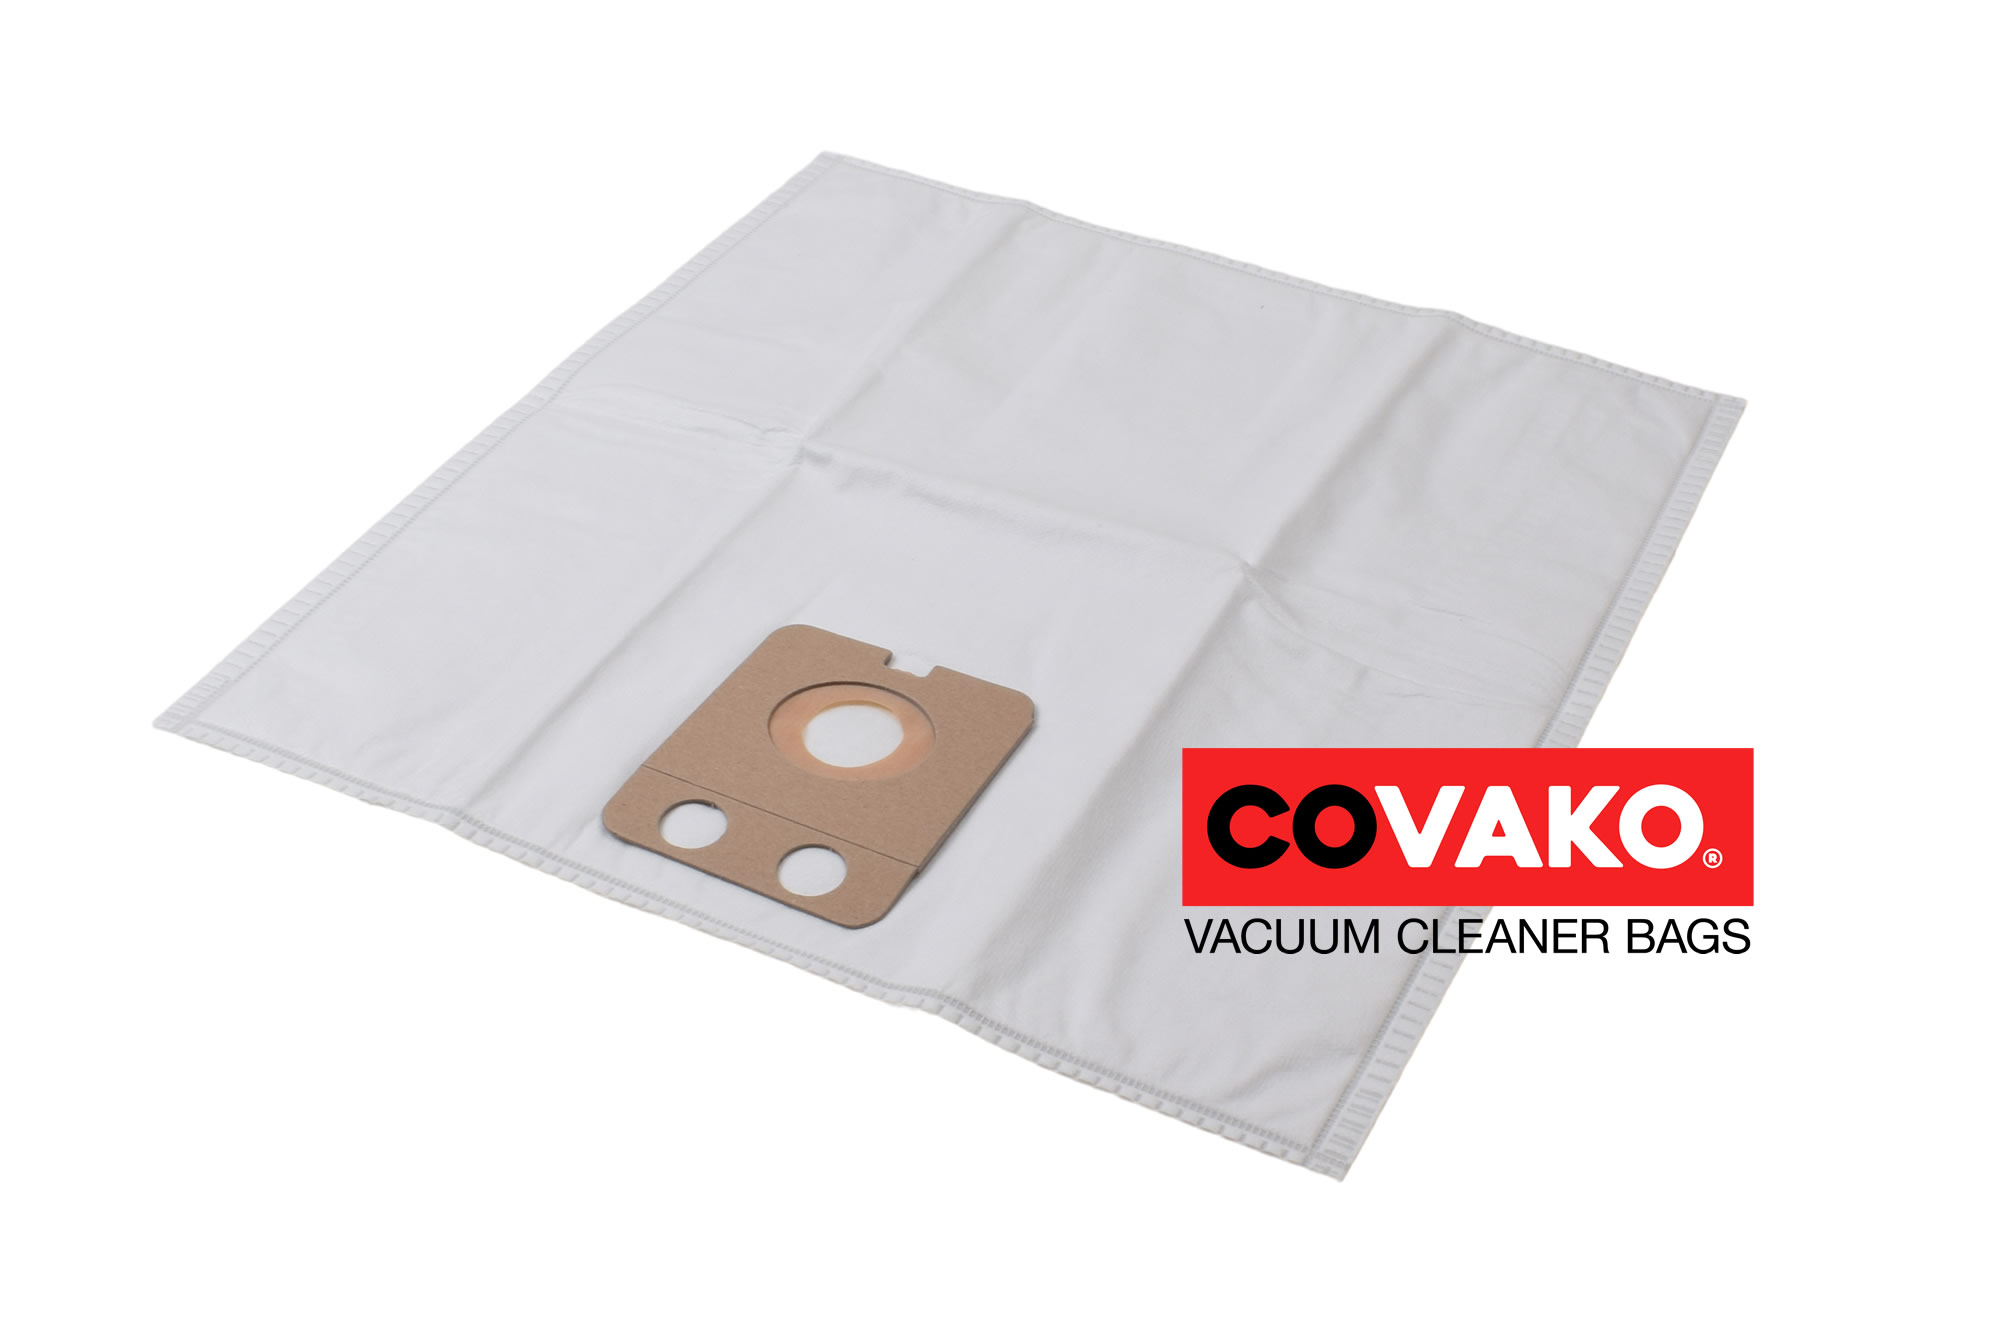 Alto VP 300 eco / Synthesis - Alto vacuum cleaner bags